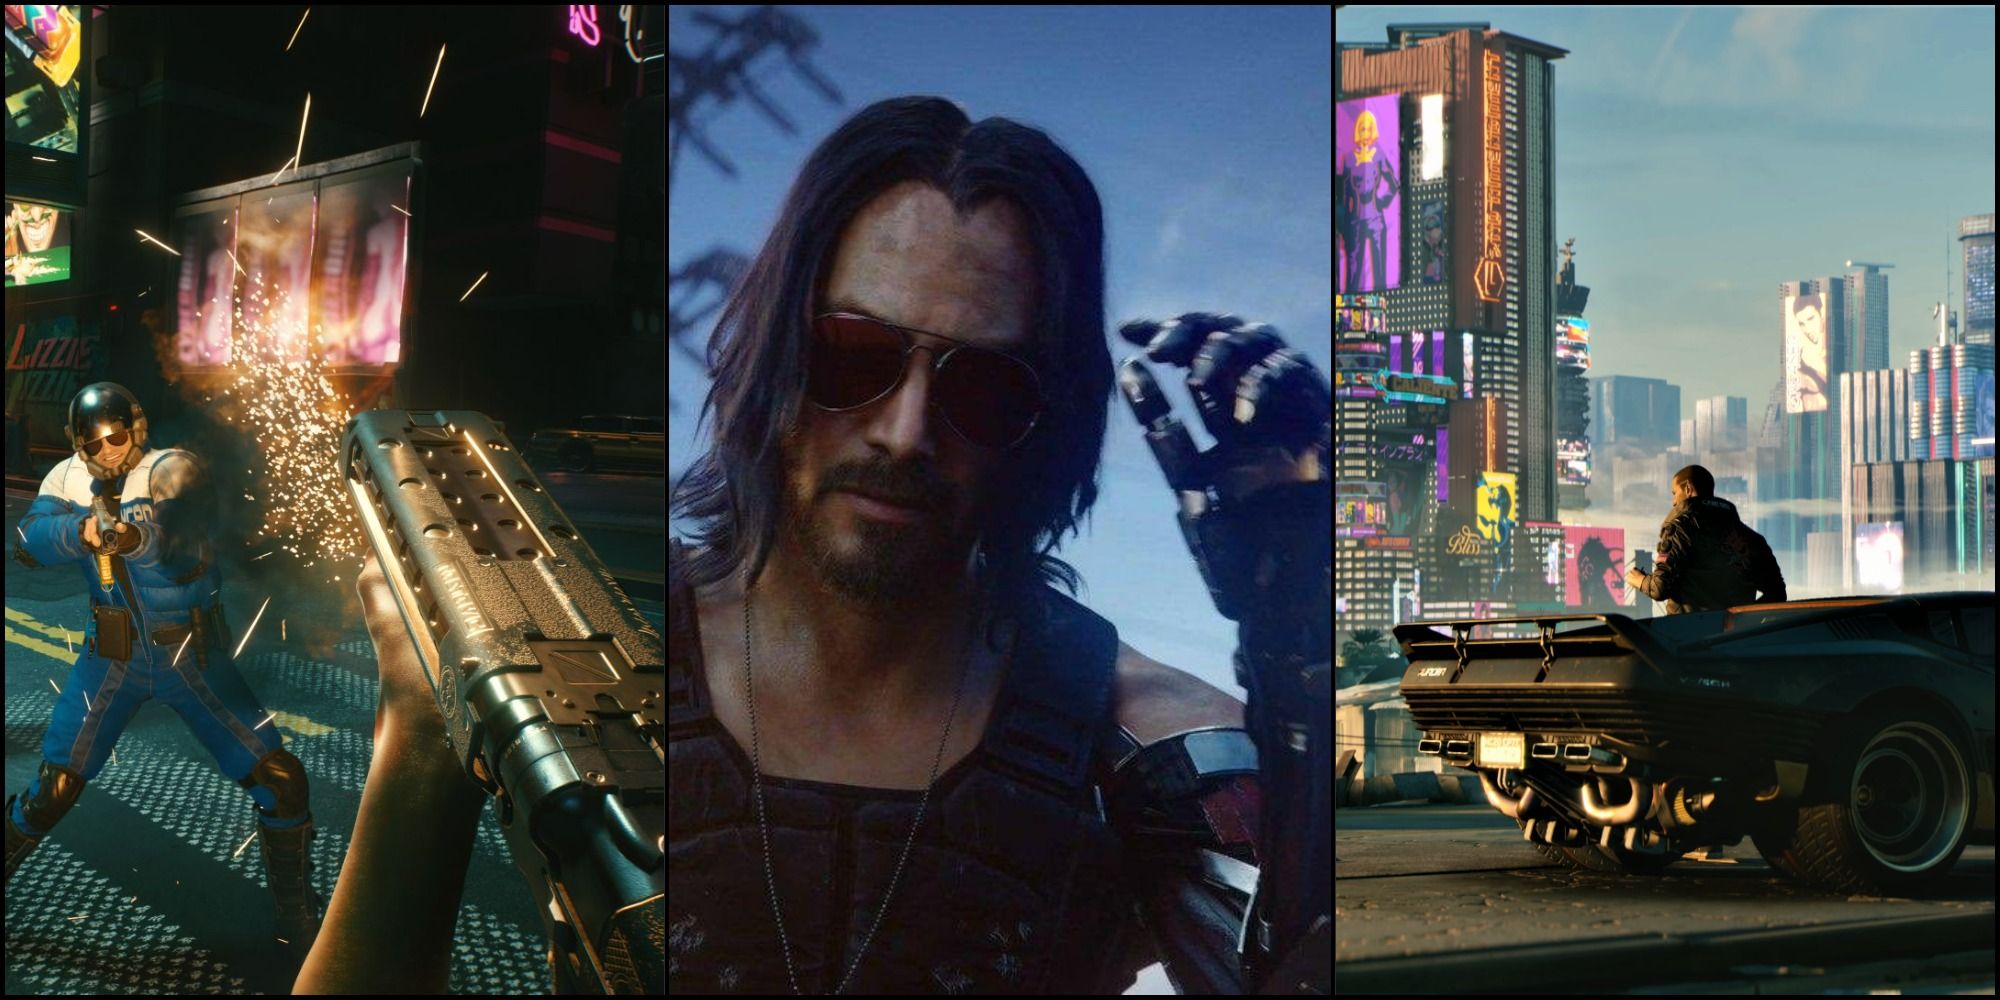 A split image for Cyberpunk 2077 featuring a gunfight to the left, Johnny Silverhand in the middle and V on the right